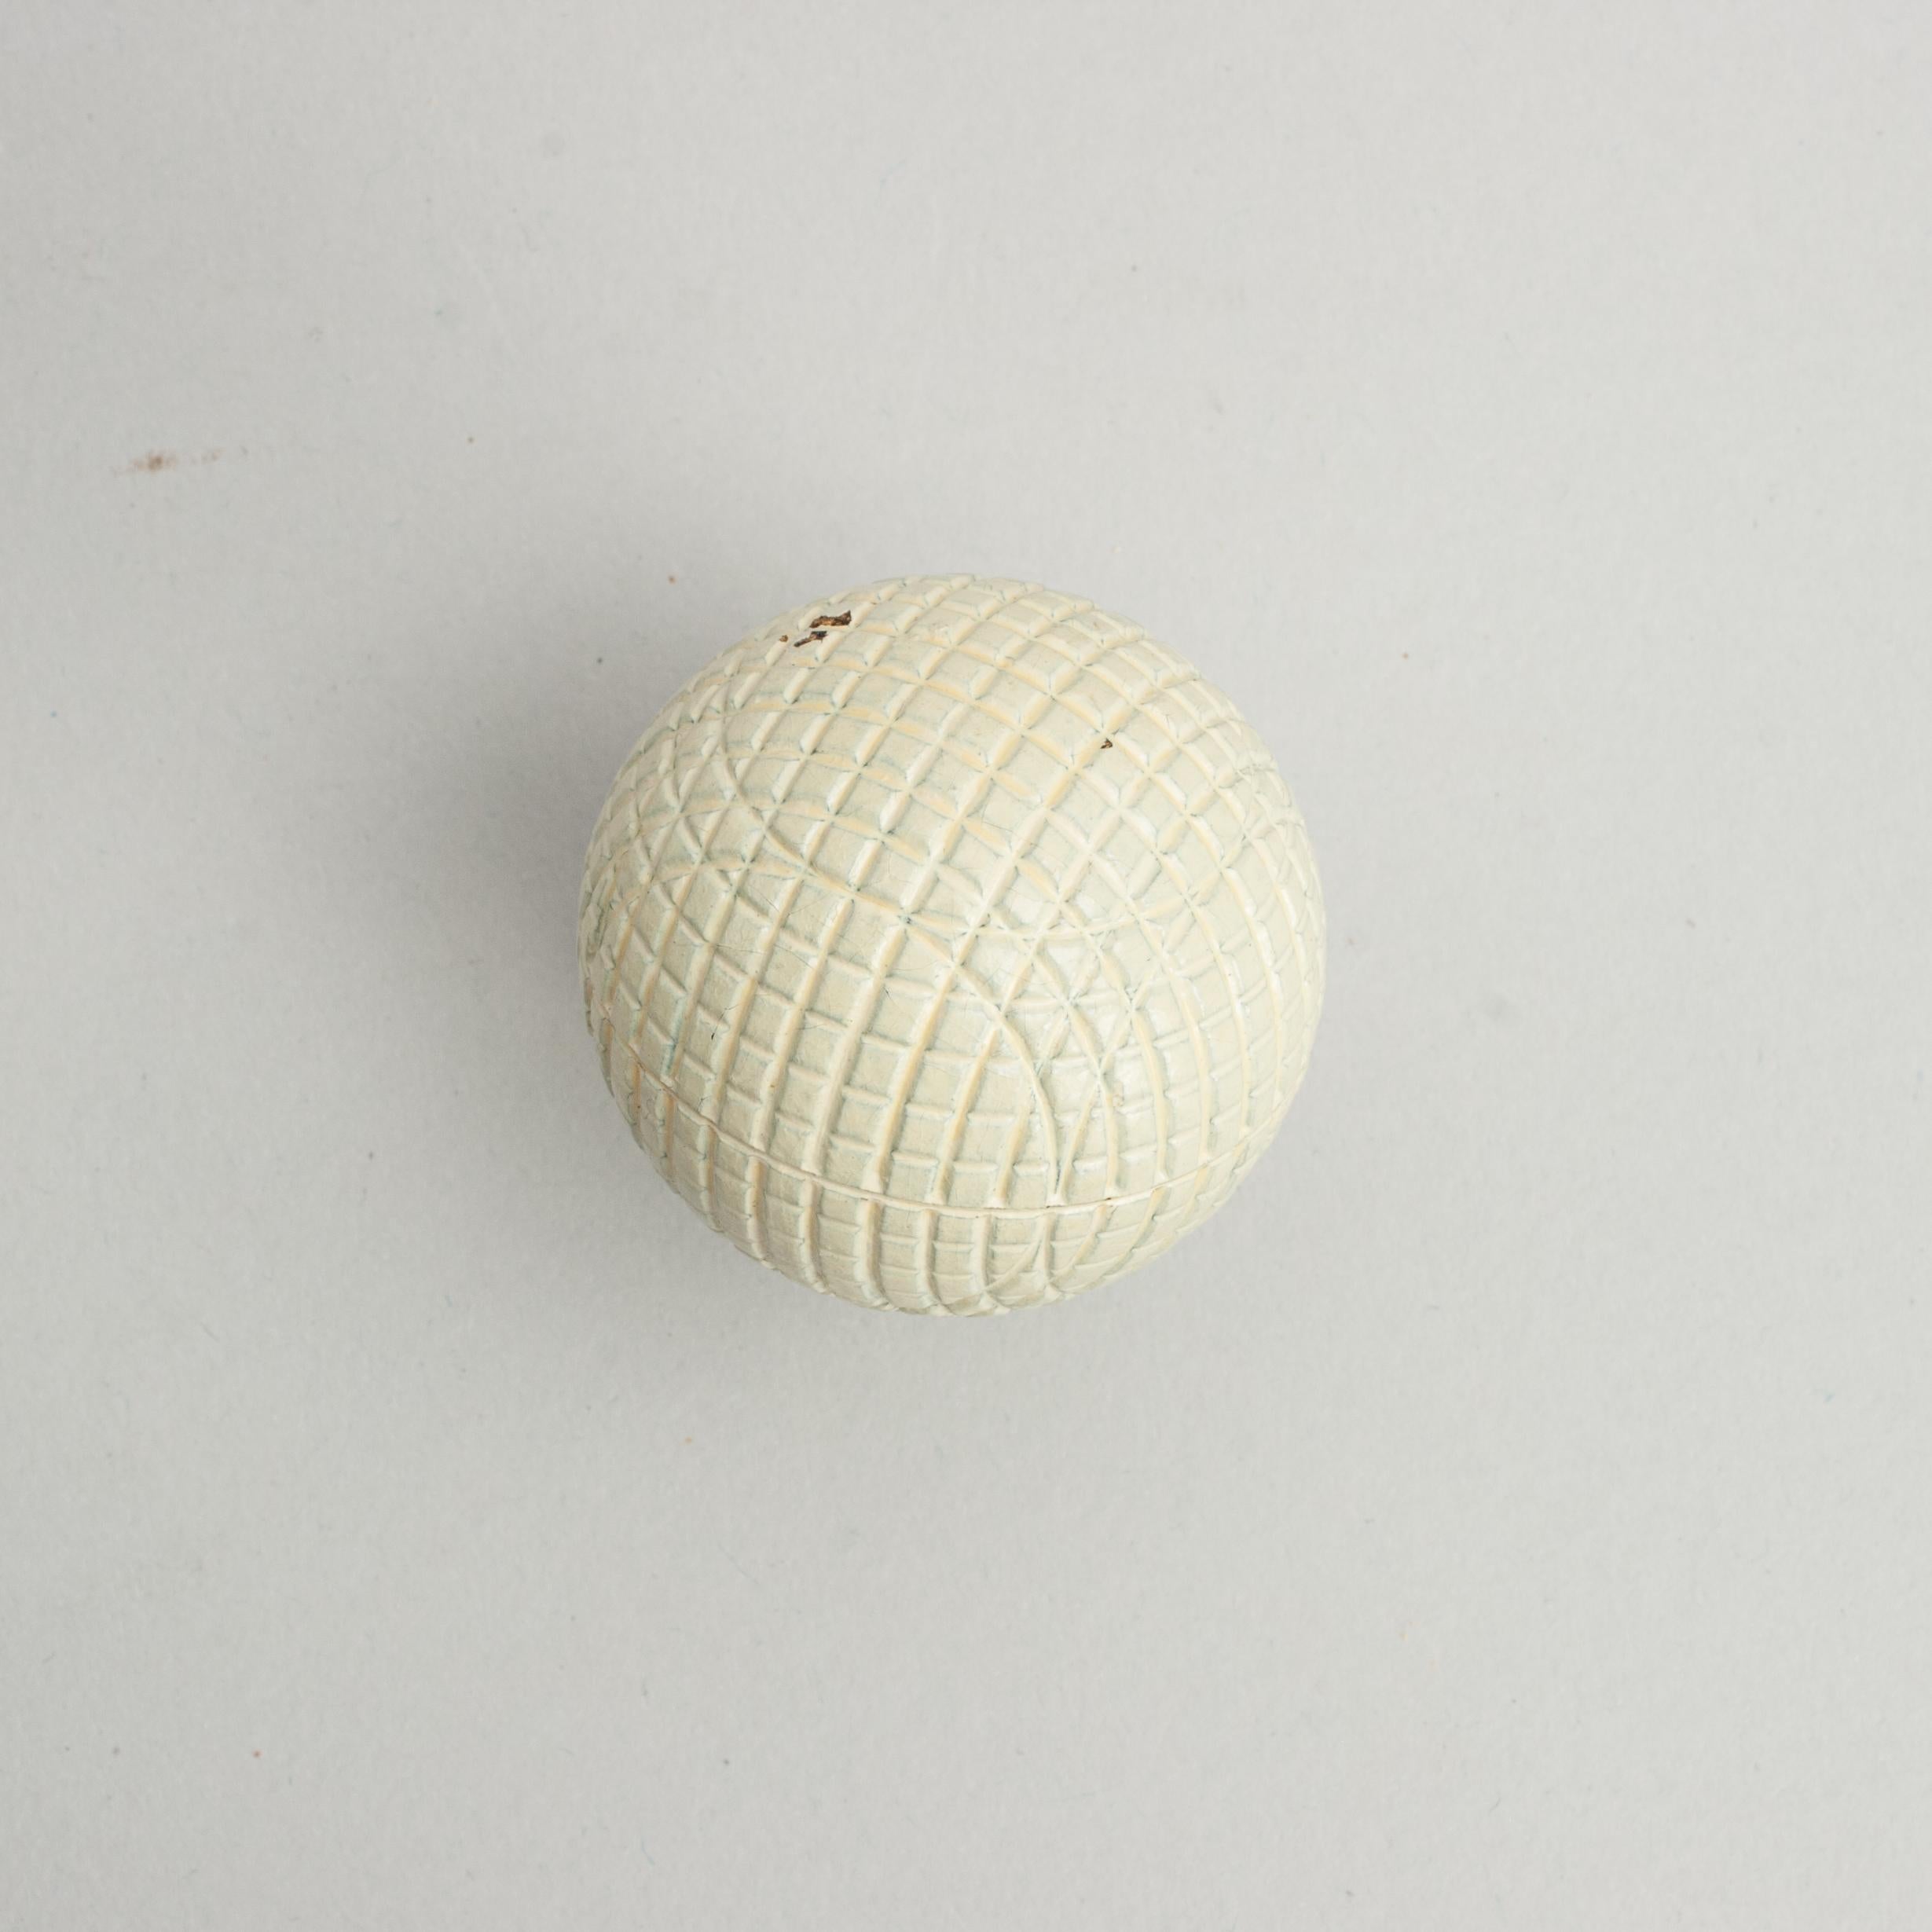 Unused Antique Gutty Golf Ball.
An exceptional example of a moulded mesh patterned Victorian gutta percha golf ball, manufacture unknown. The ball is in mint condition and is with the classic mesh pattern and original white paint.

The ball is